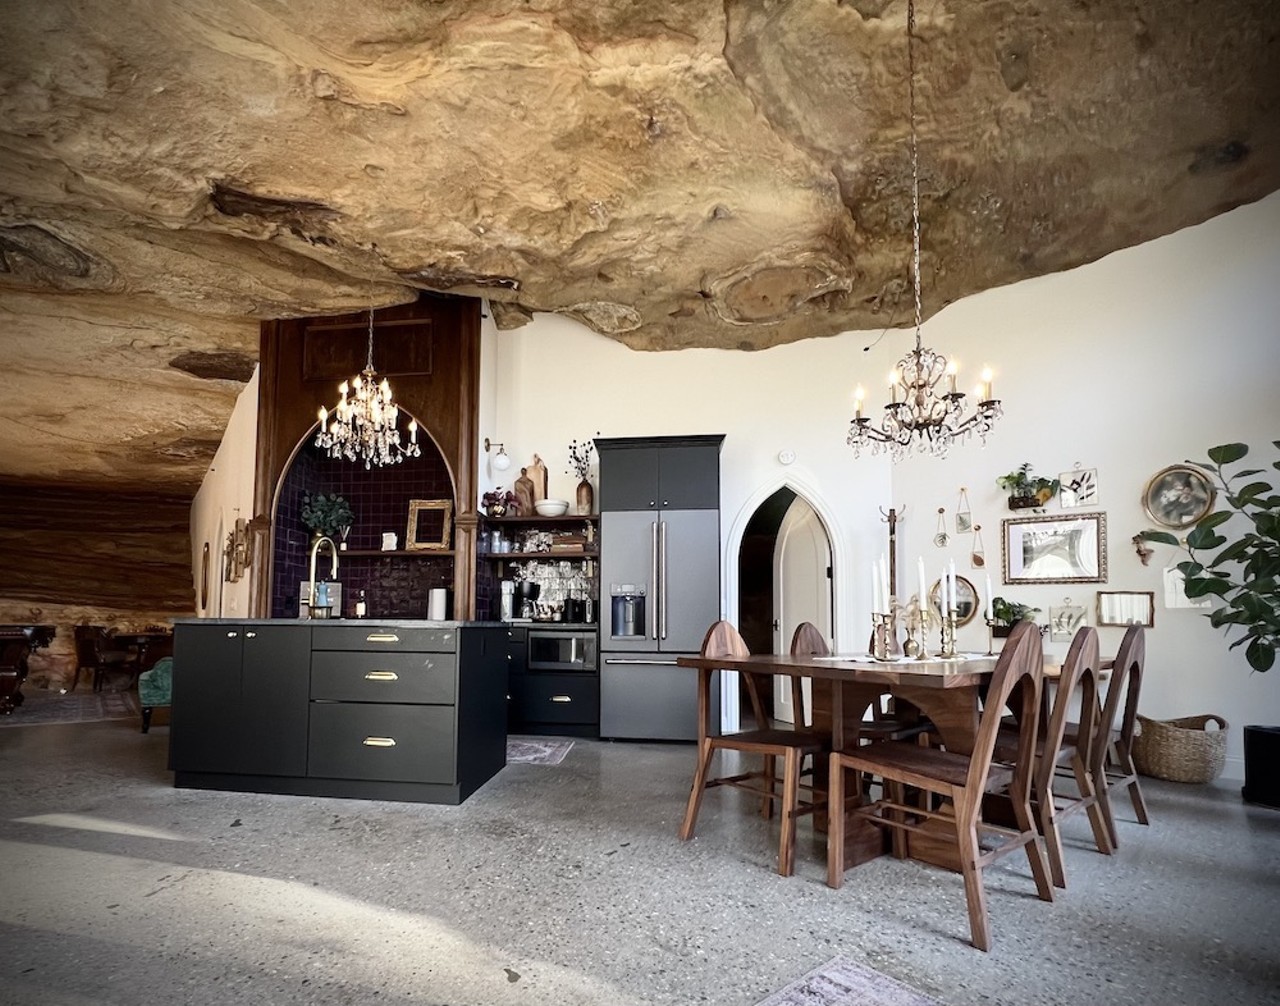 You Can Stay in a Cave House During Your Next Visit to Hocking Hills